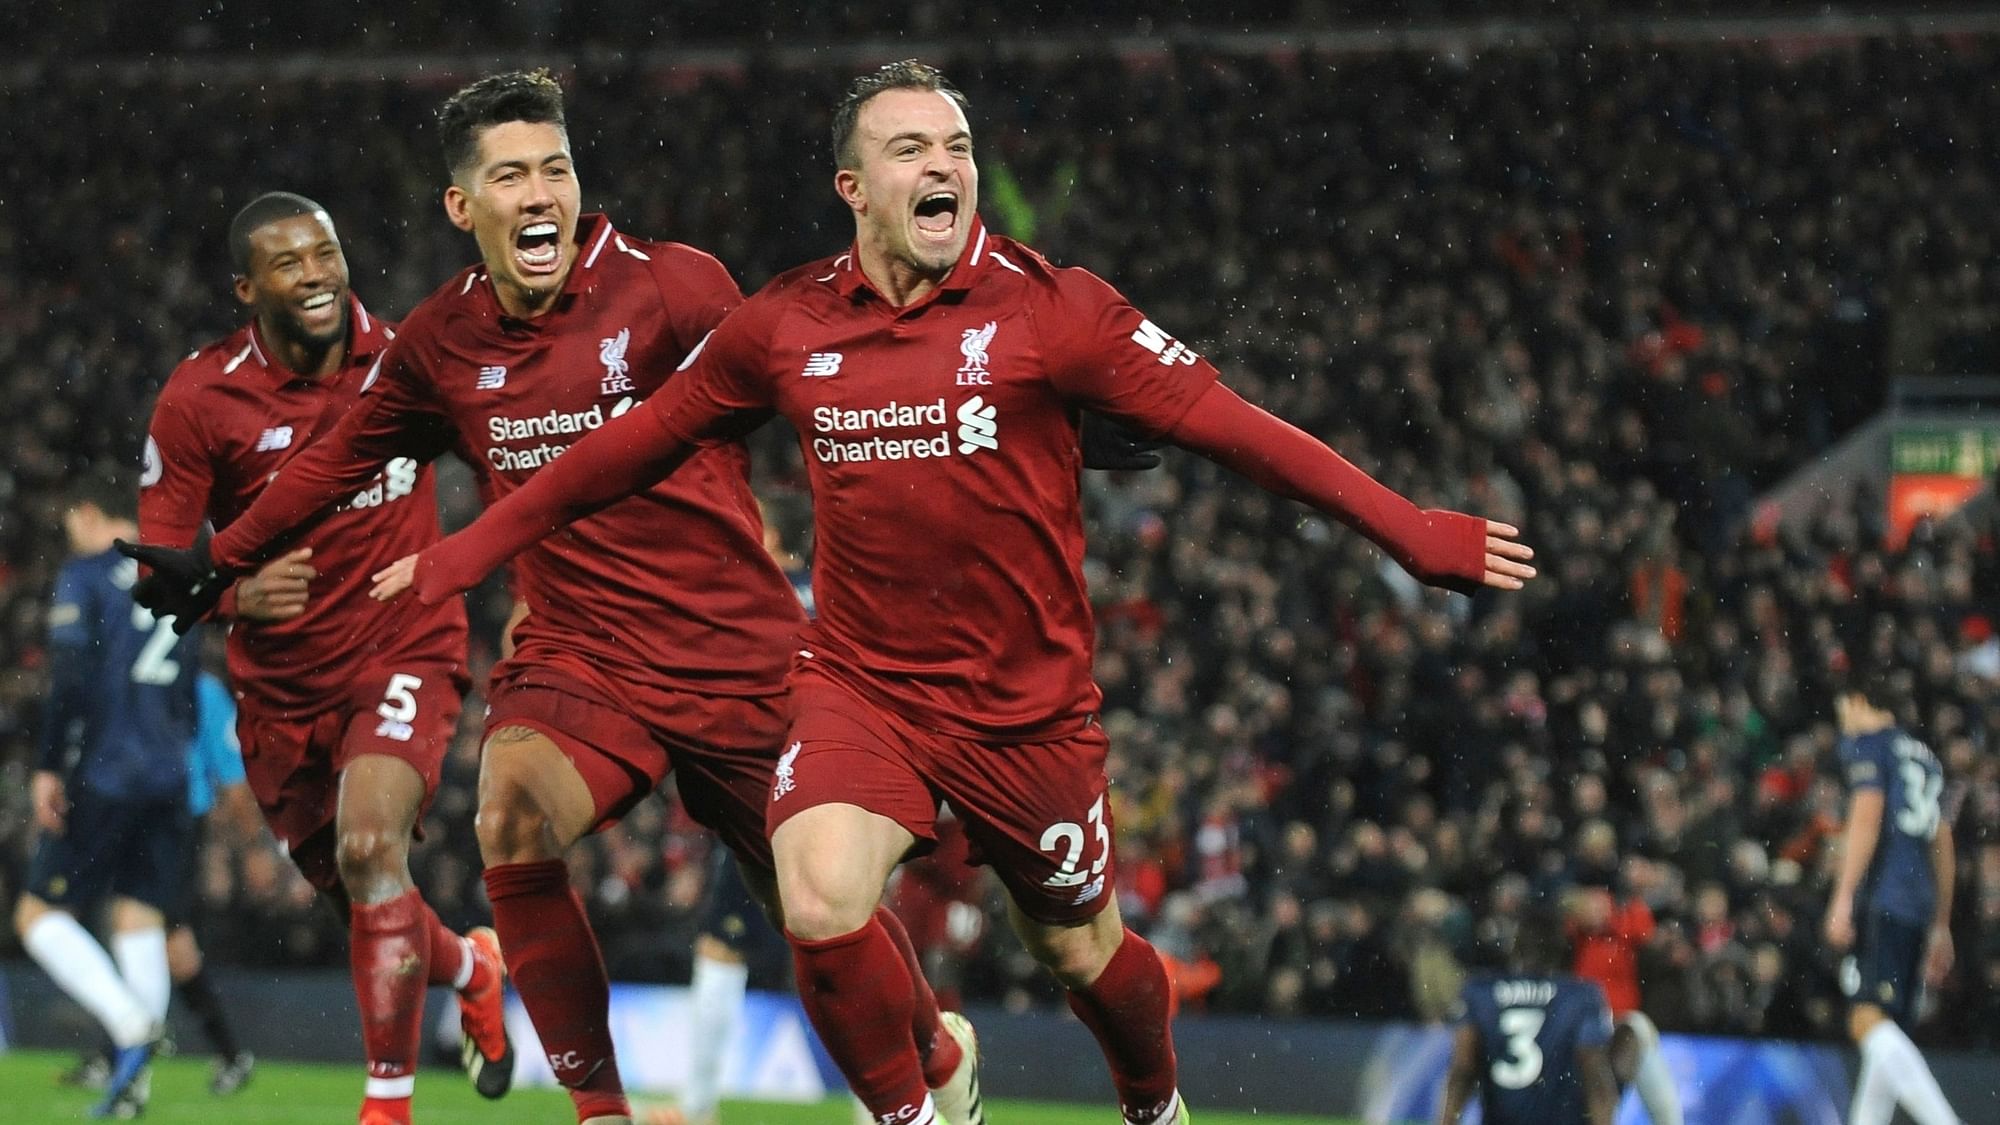 Liverpool’s Xherdan Shaqiri, right, celebrates after scoring his side’s third goal during the English Premier League soccer match between Liverpool and Manchester United.